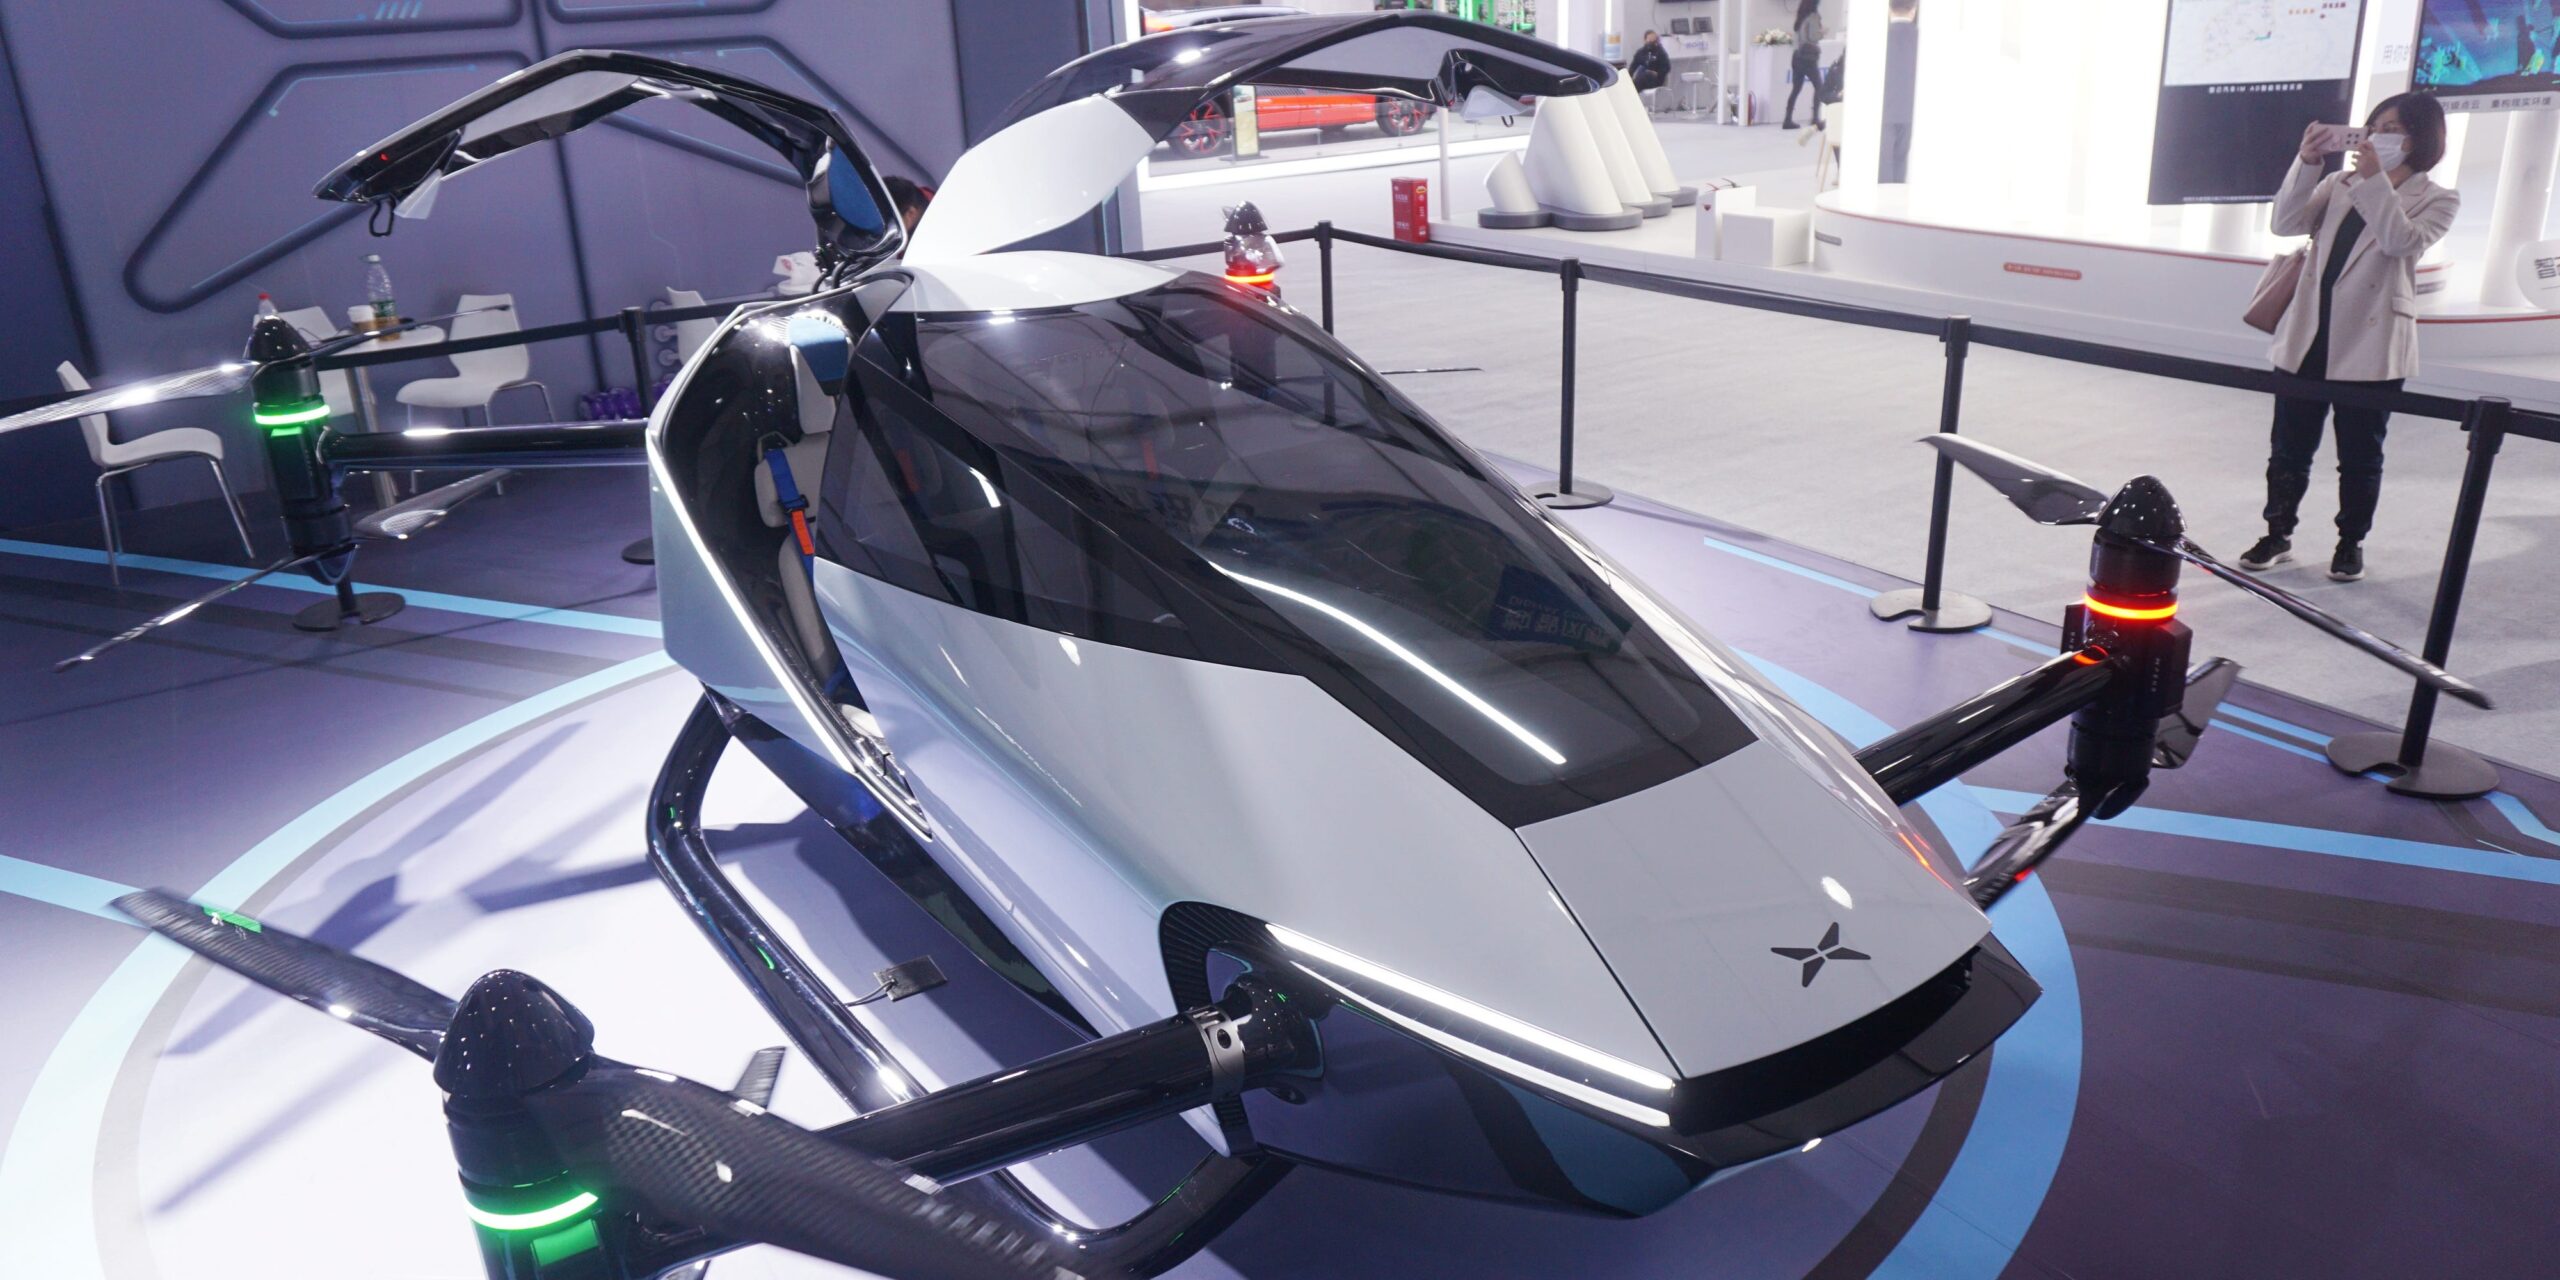 Chinese electric-vehicle maker Xpeng plans to mass produce flying cars by 2024 and says they’ll cost less than $157,000